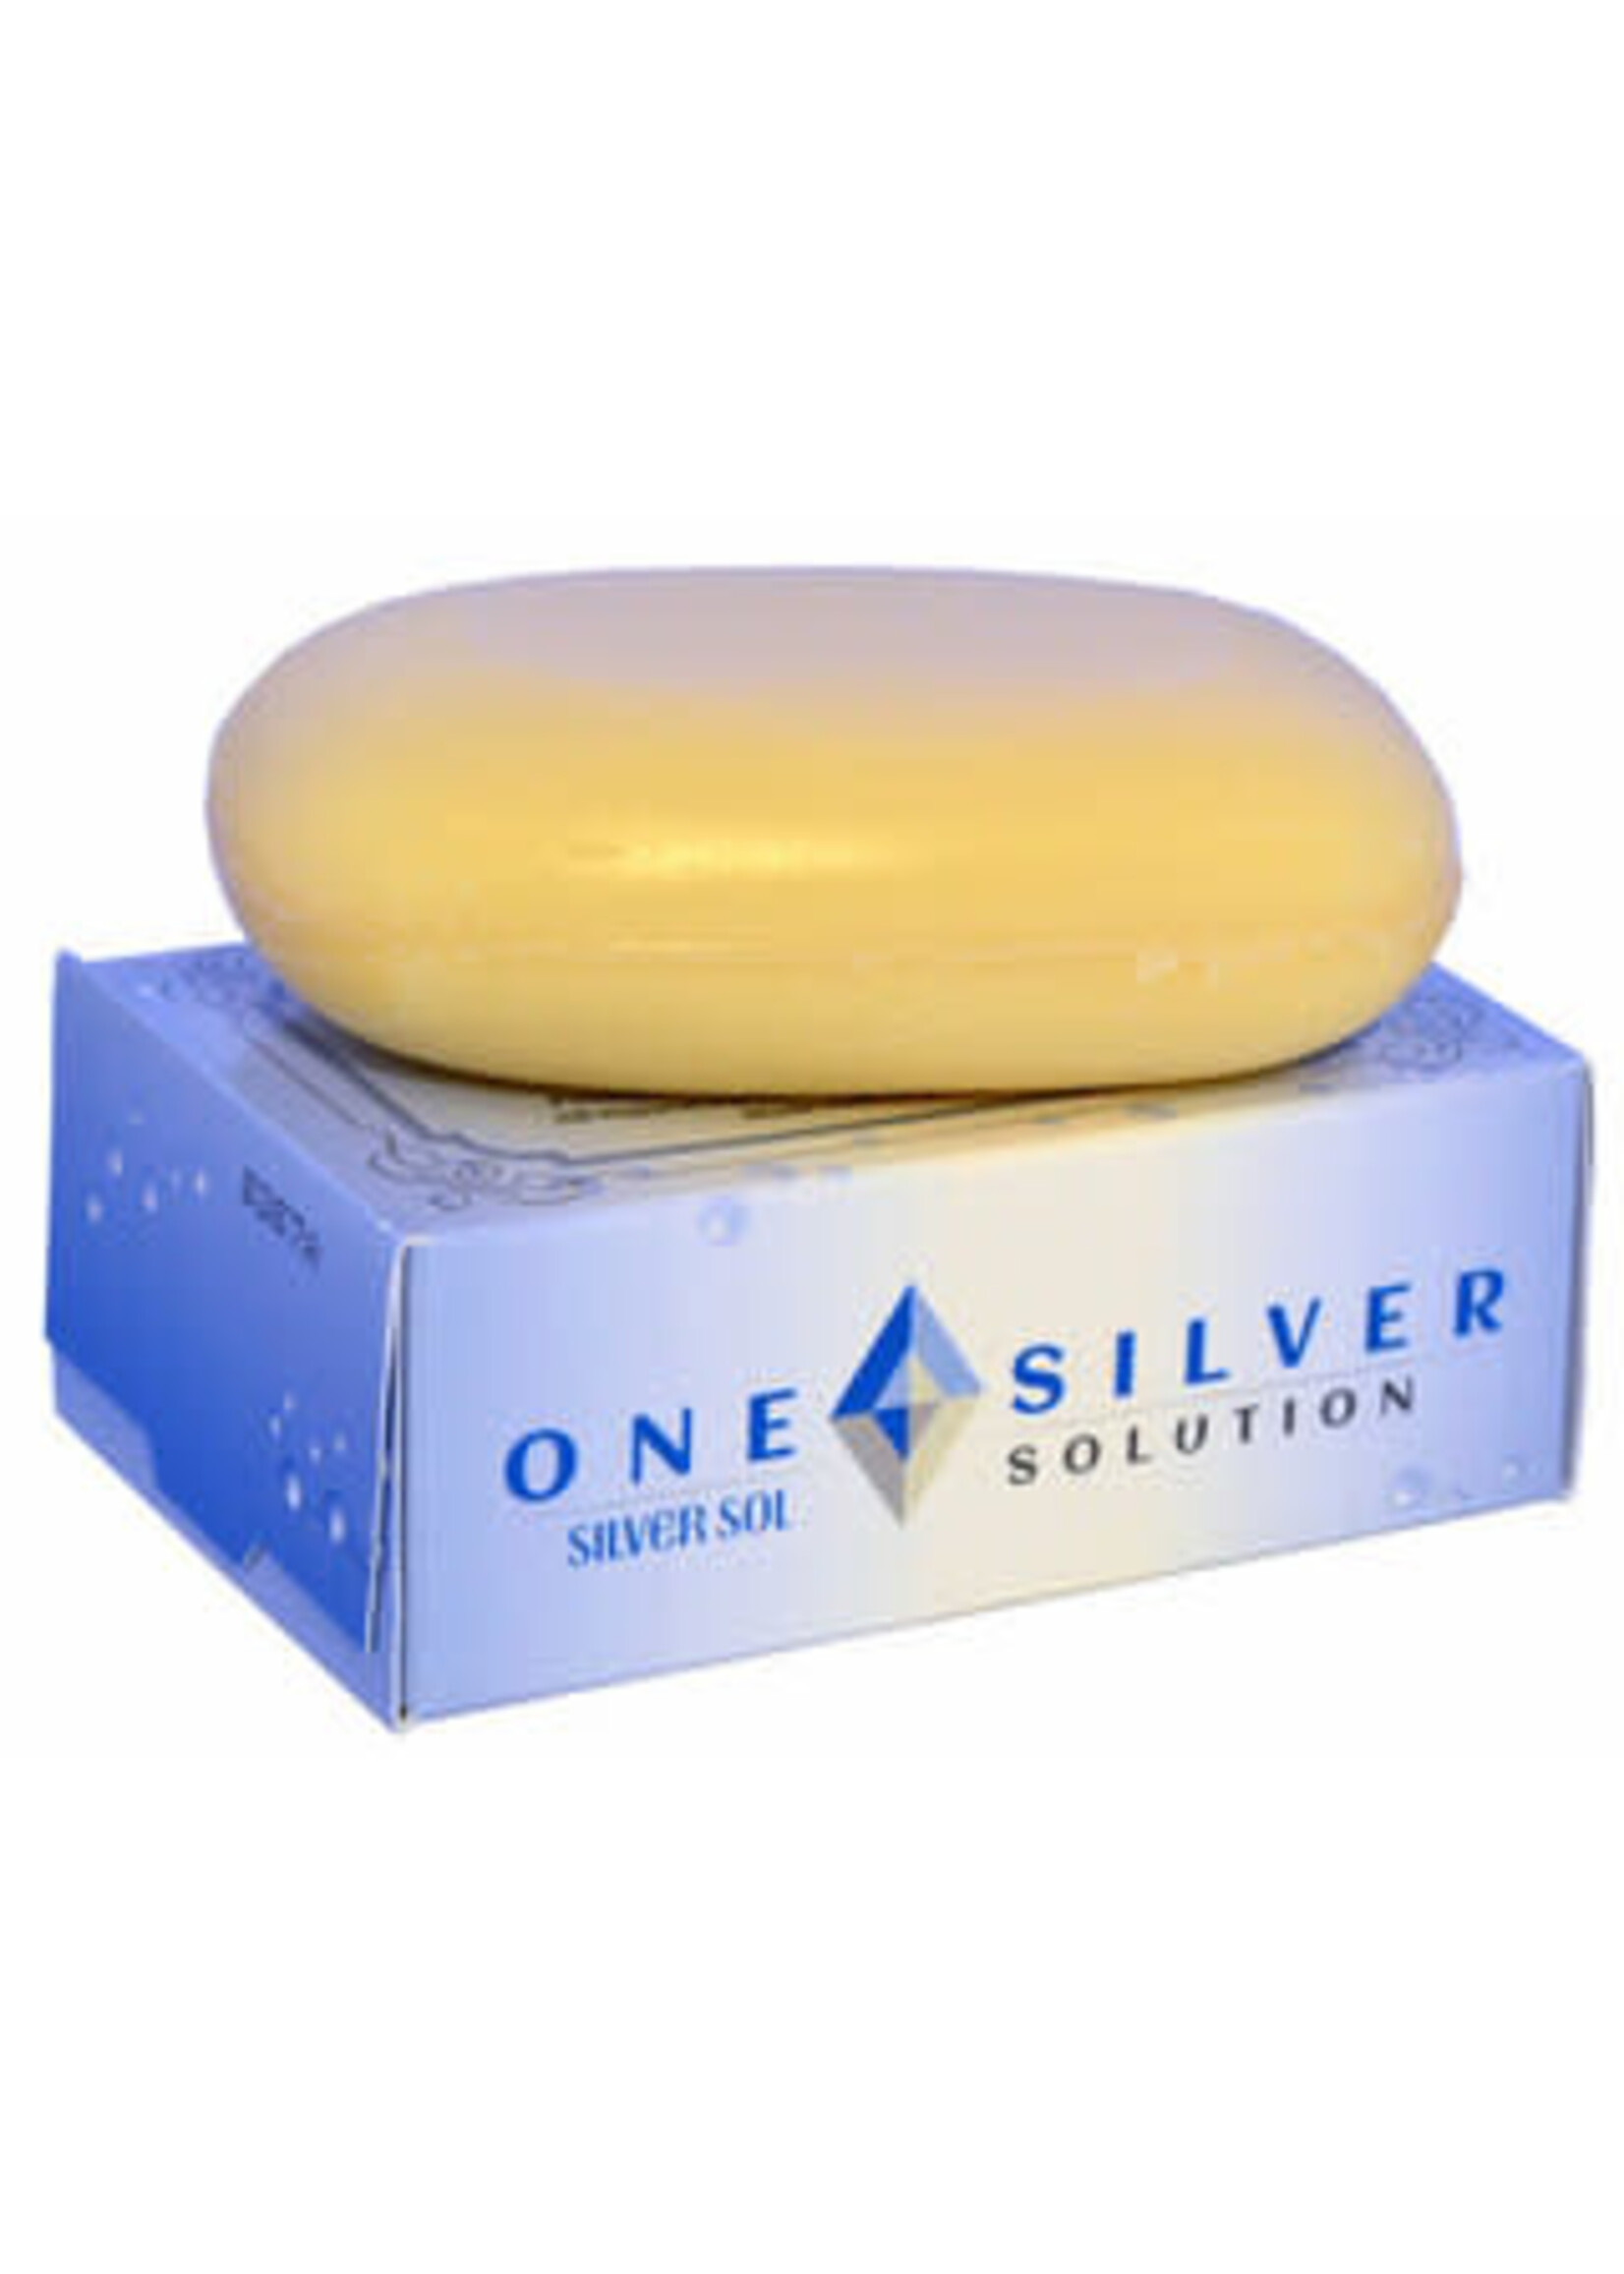 One Silver Soap Luxurious Bar Soap